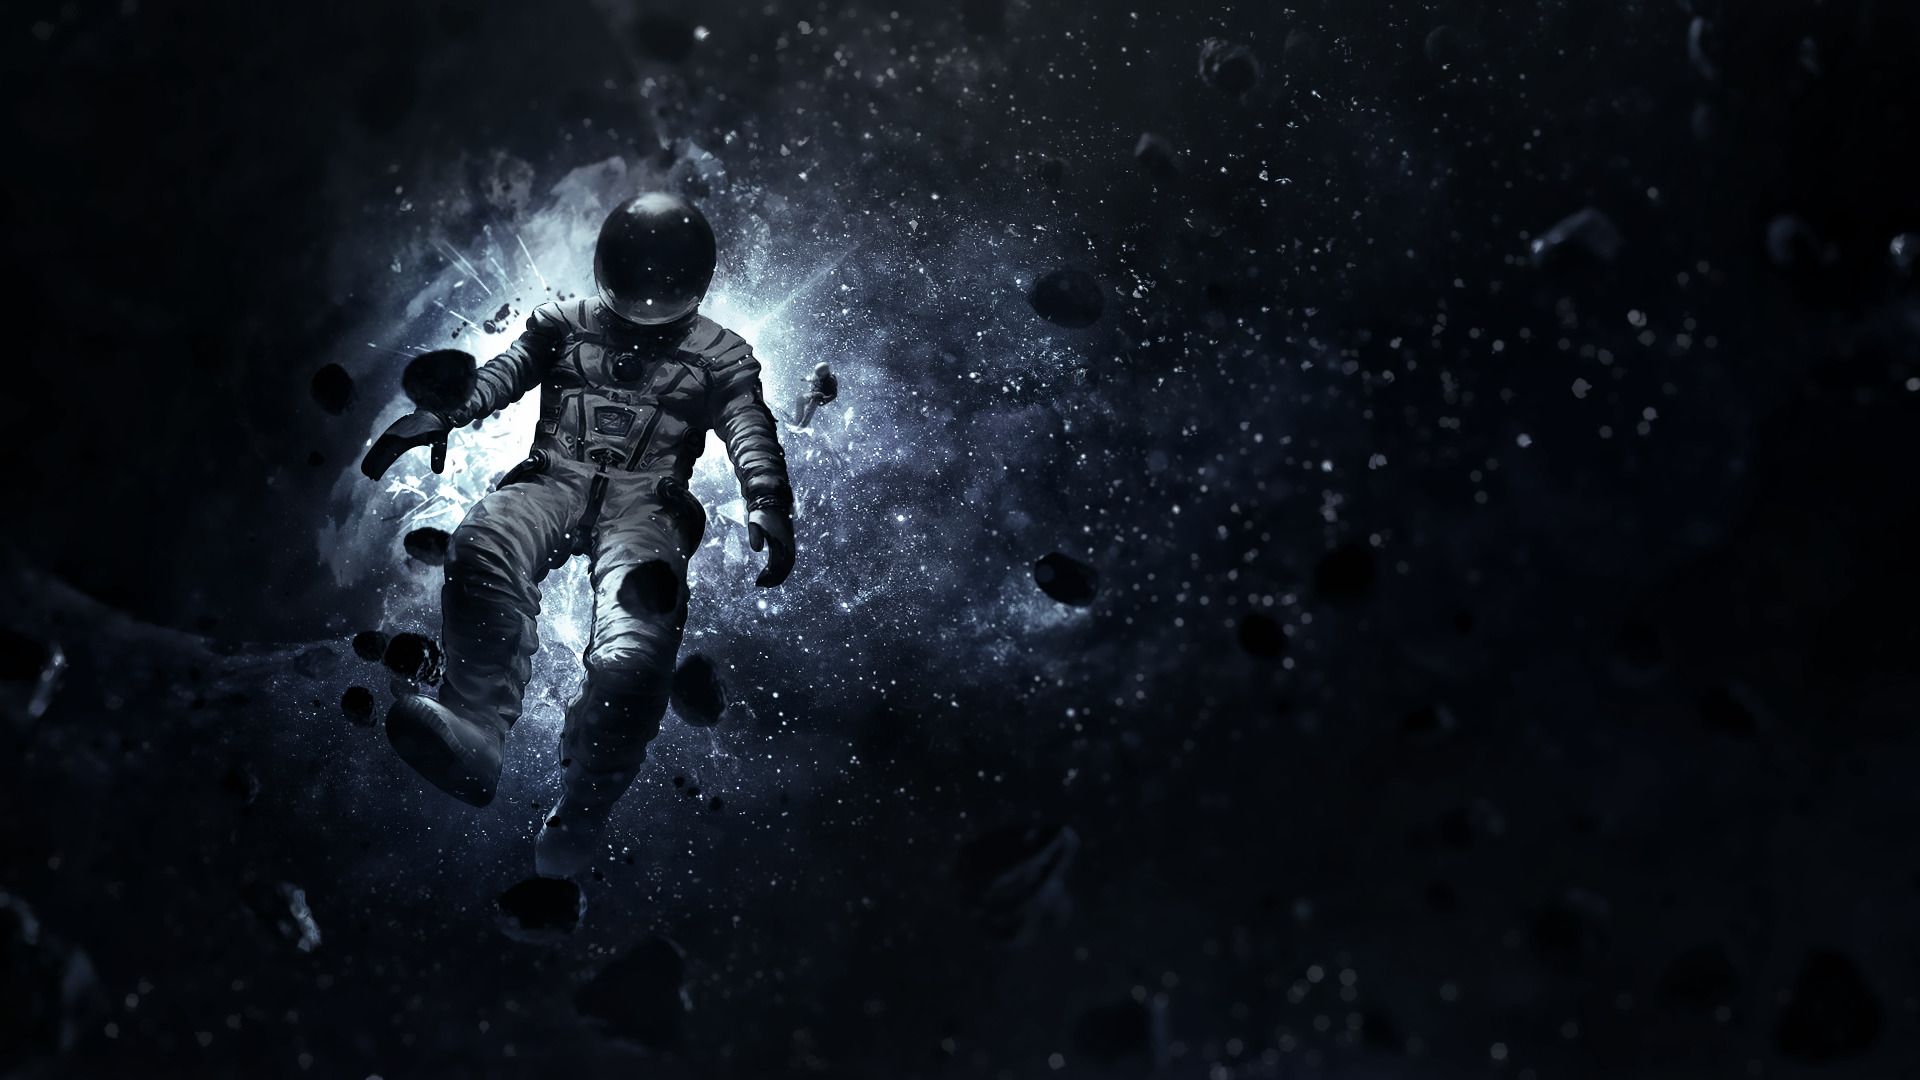 Astronaut floating in space  Astronaut wallpaper Outer space wallpaper  Astronauts in space